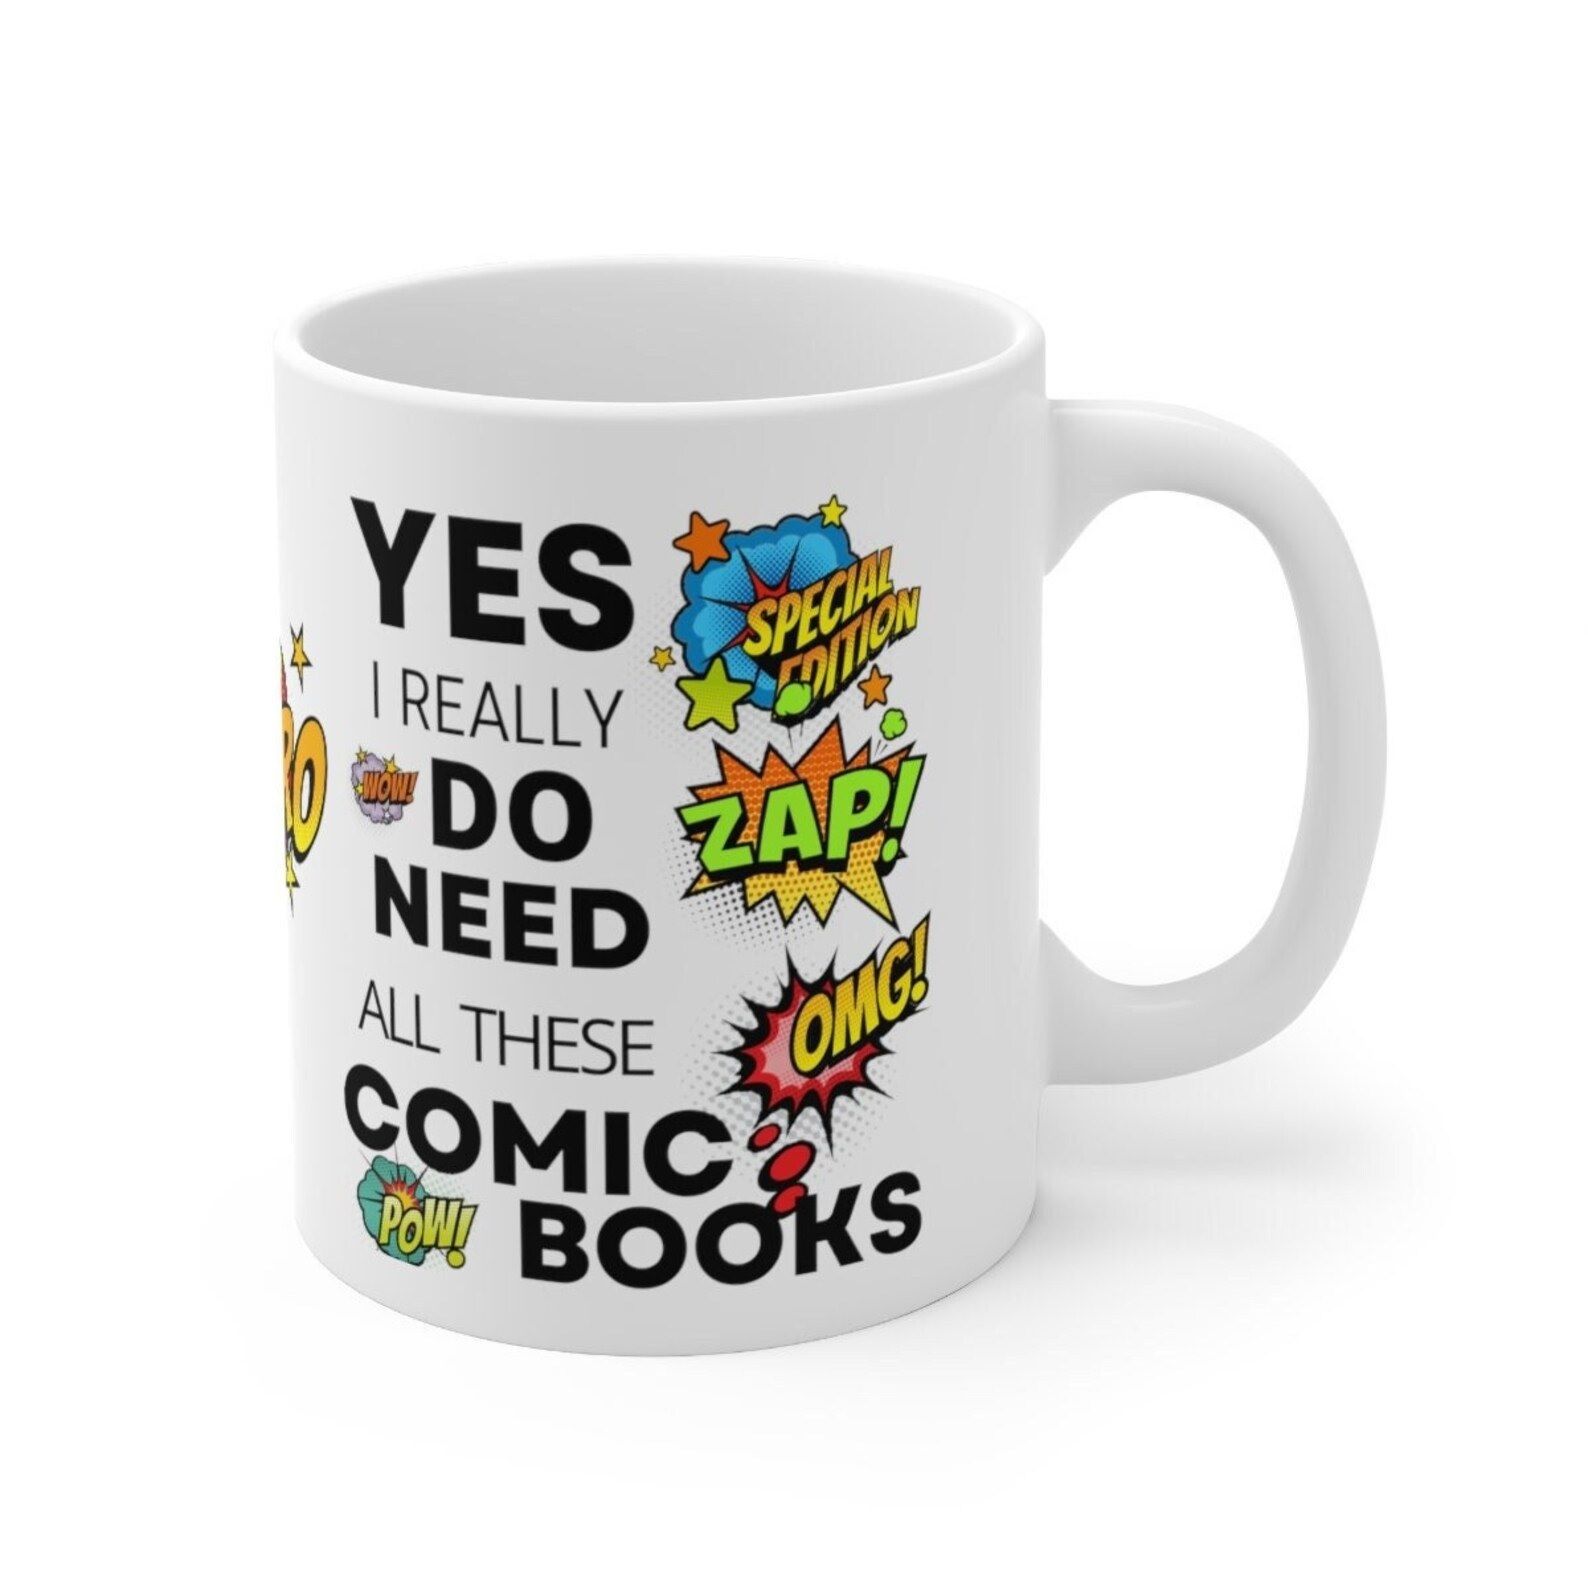 A white mug with onomatopoeias and black tex that says "Yes, I really do need all these comic books"